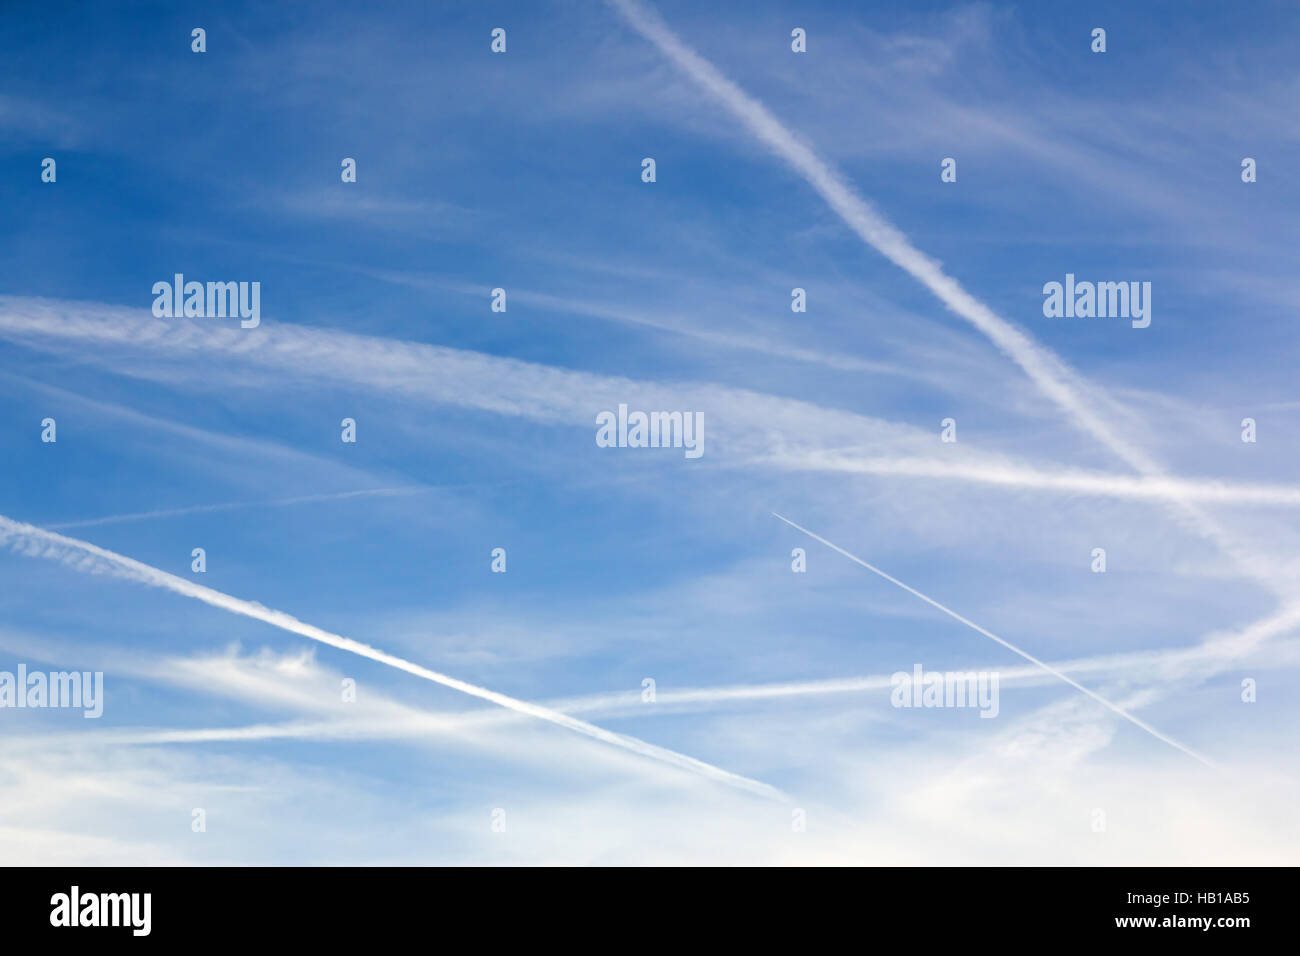 Sky with contrails and clouds, for use as background, copy or text. Stock Photo